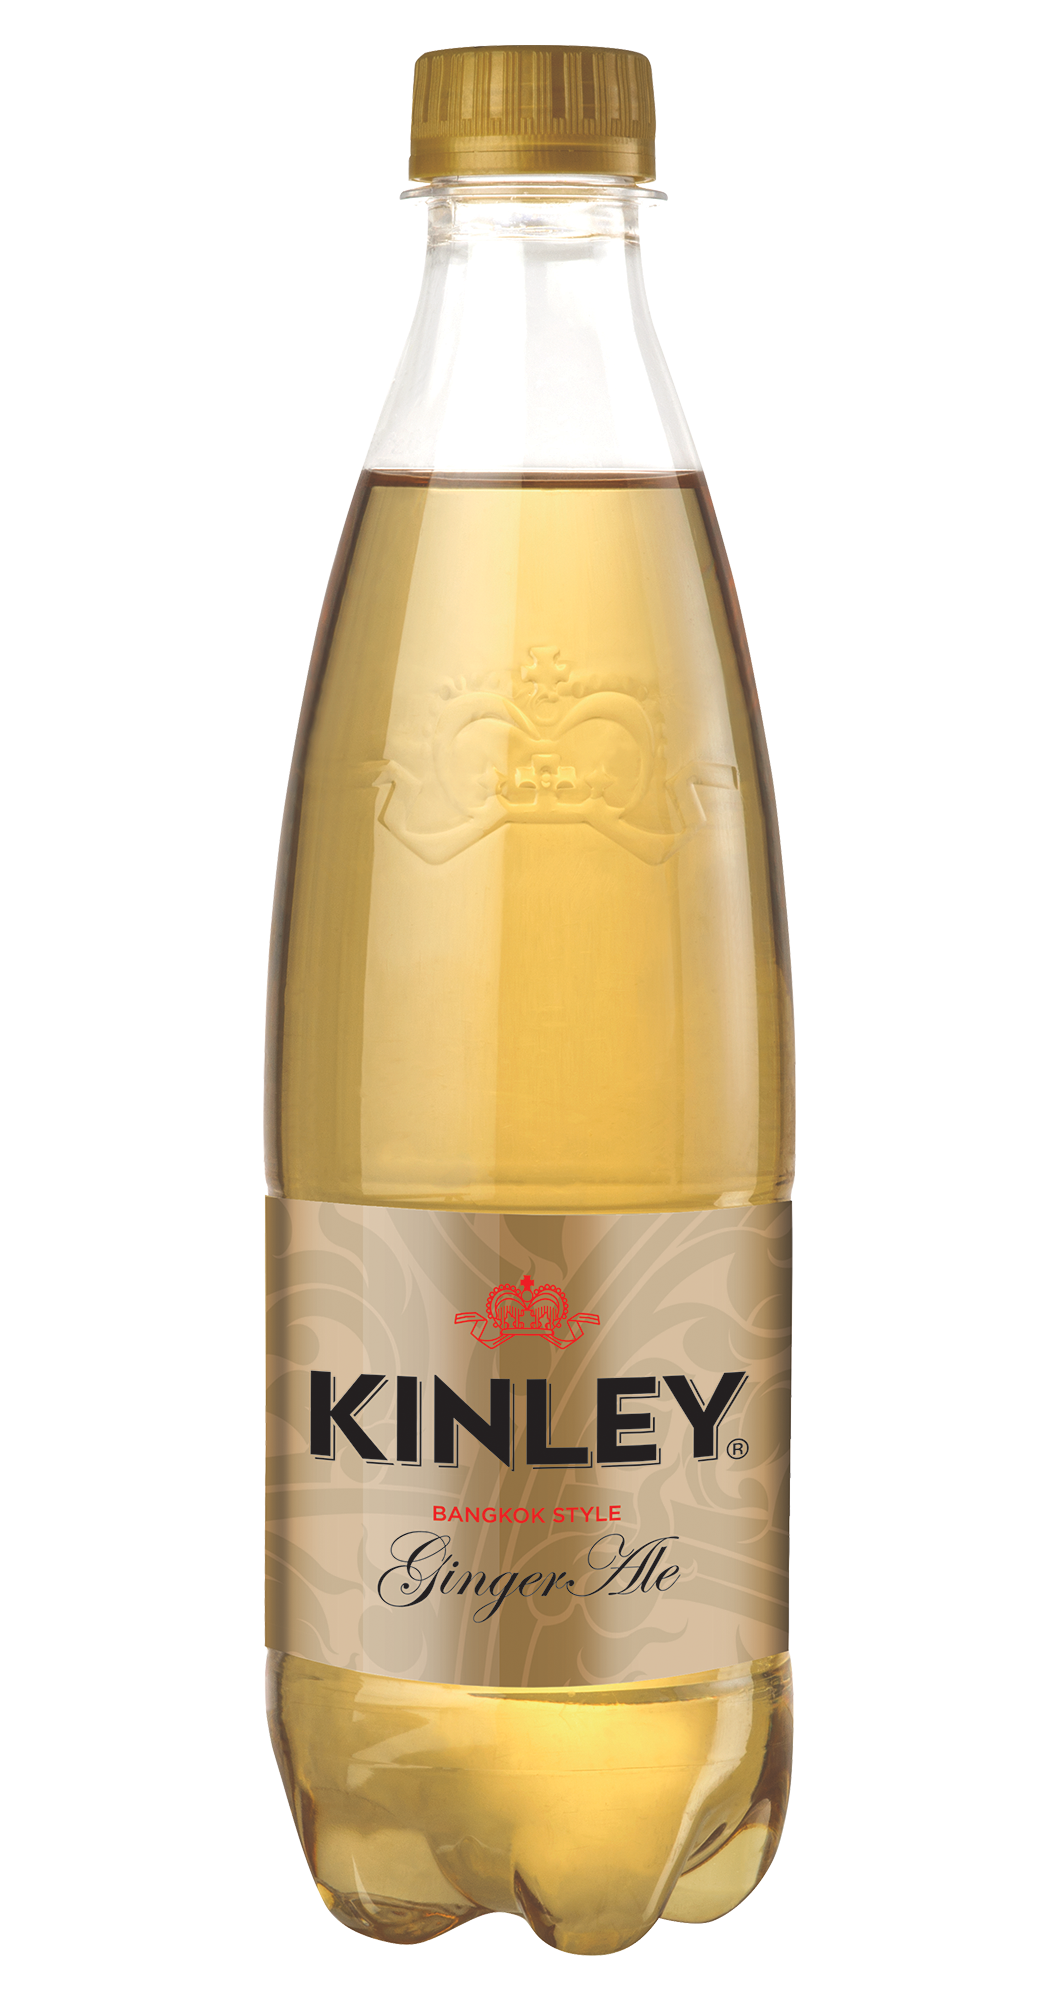 Kinley Ginger Ale 500 ml PET 2018_lowres